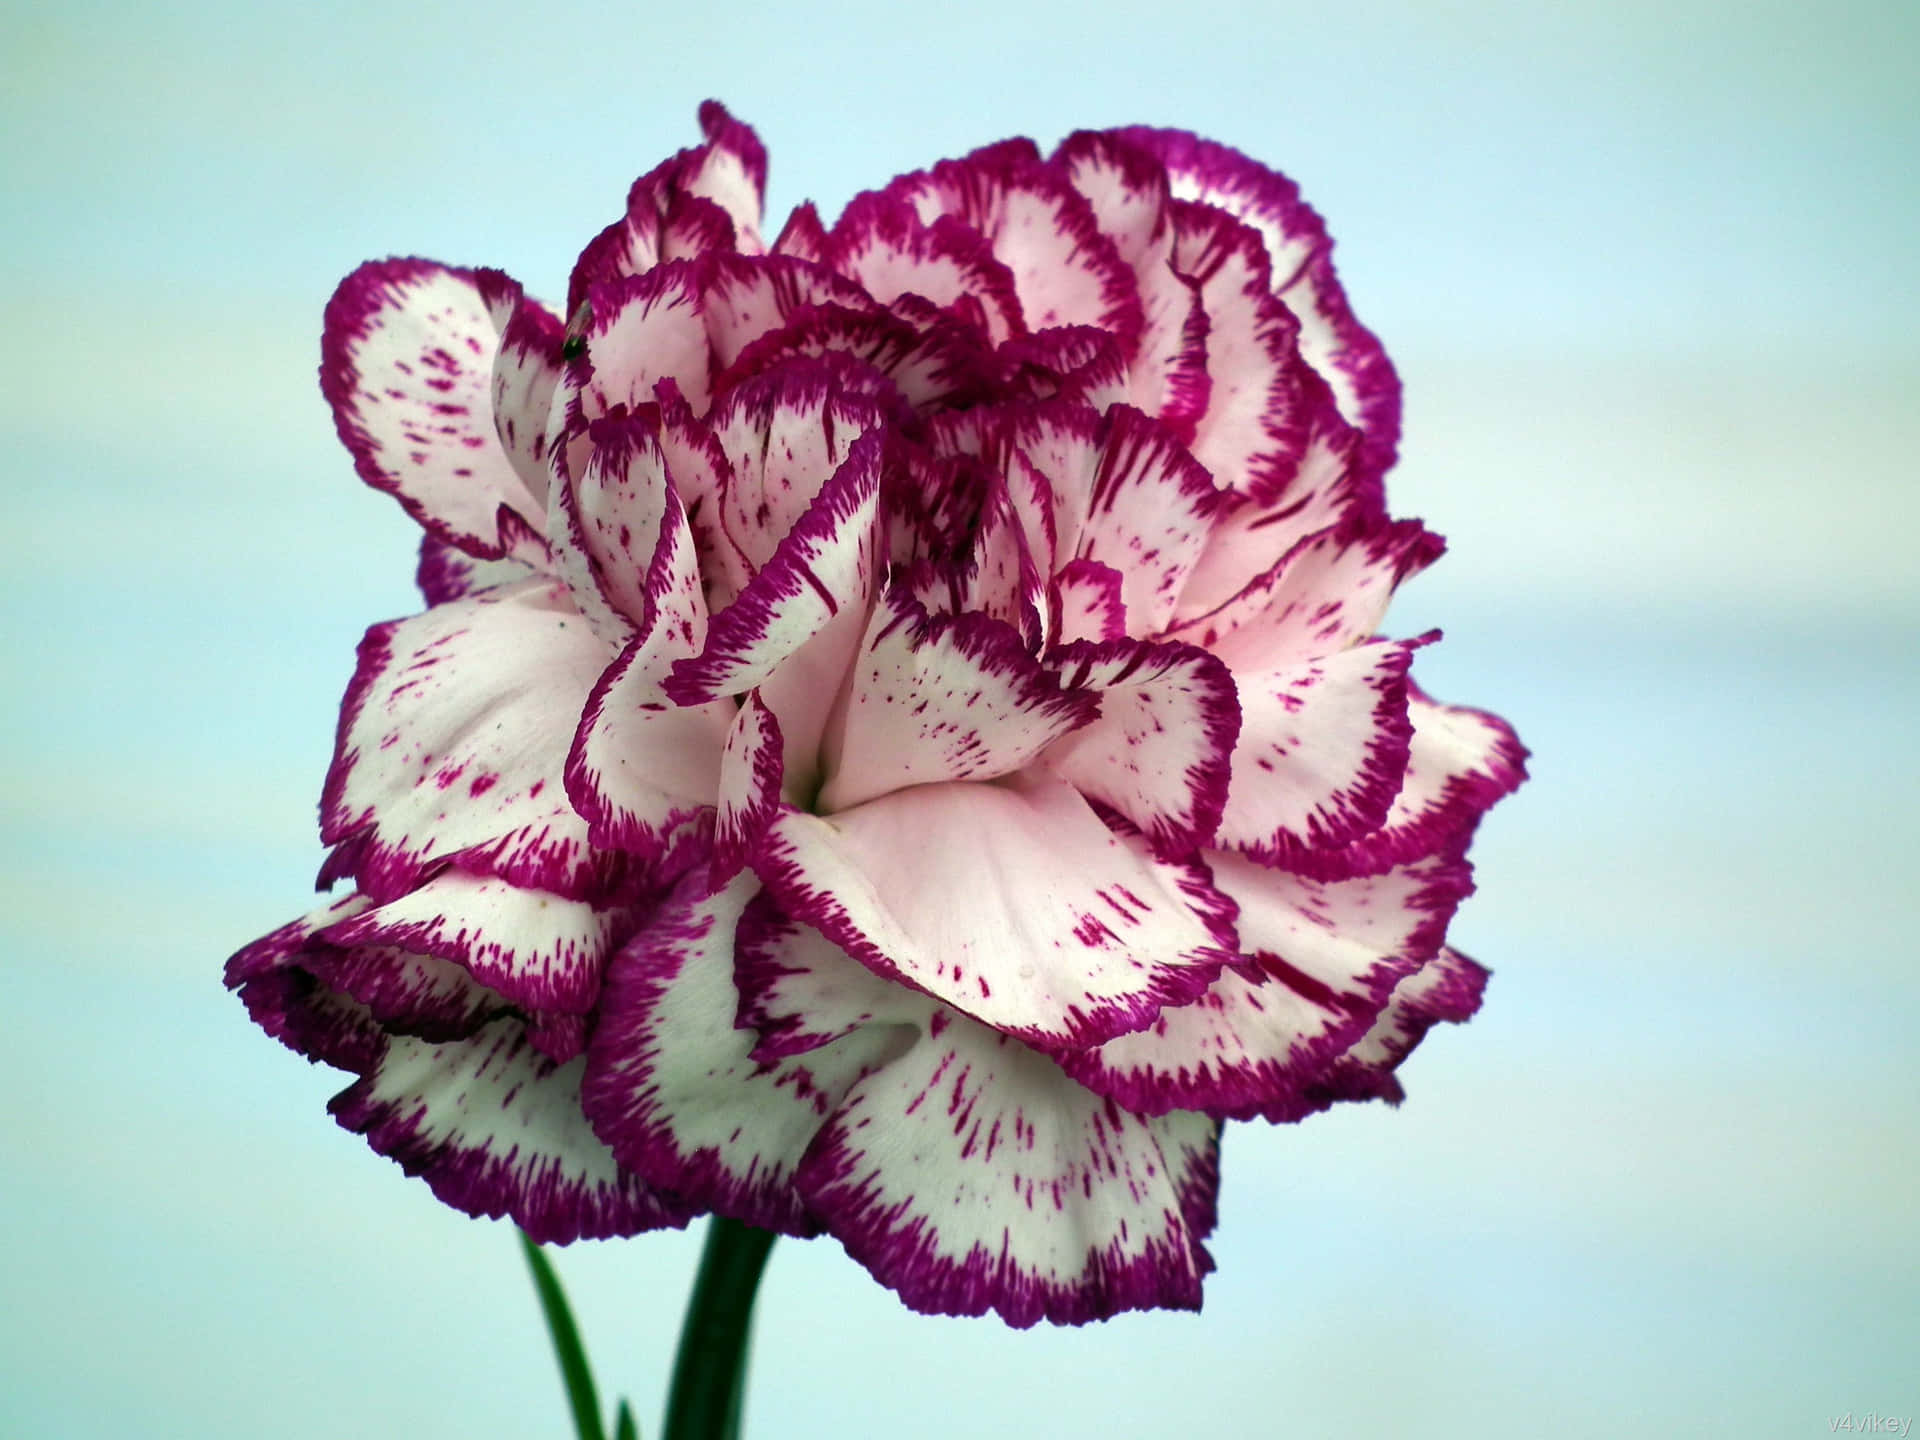 A deep pink carnation reflects a warm and romantic feeling.